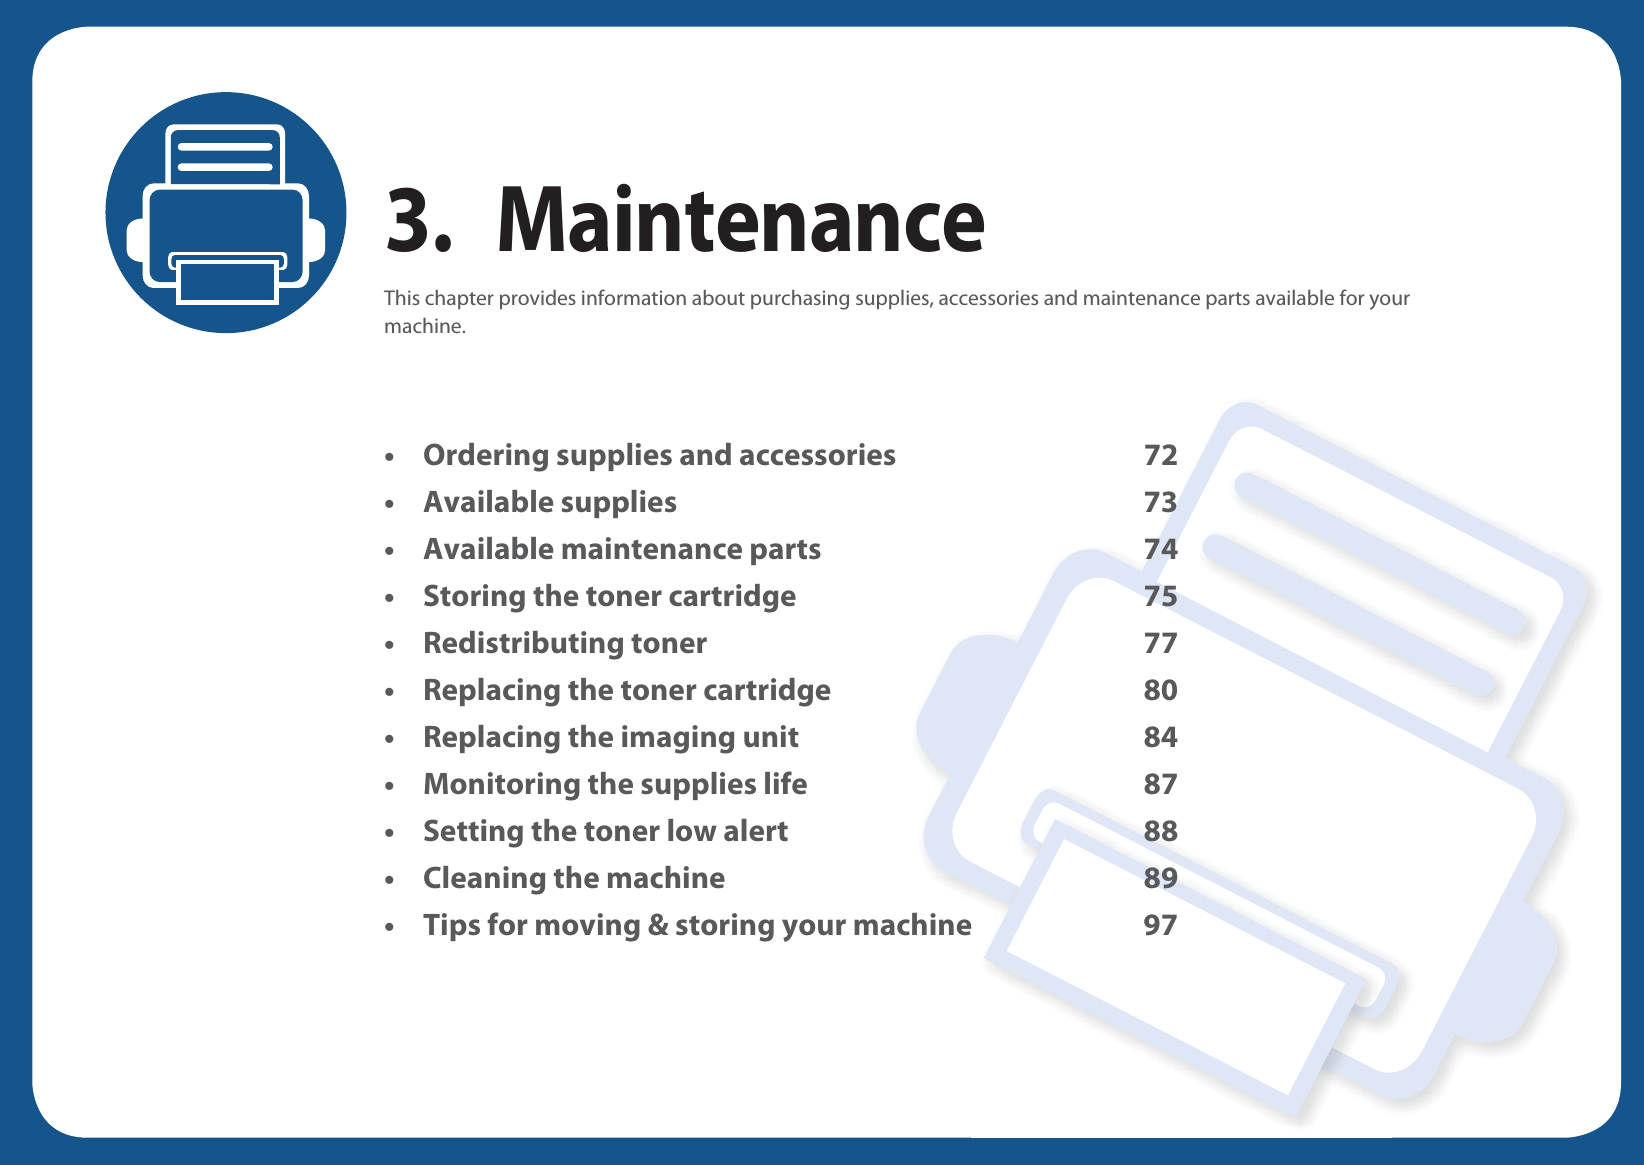 3. MaintenanceThis chapter provides information about purchasing supplies, accessories and maintenance parts available for your machine.• Ordering supplies and accessories 72• Available supplies 73• Available maintenance parts 74• Storing the toner cartridge 75• Redistributing toner 77• Replacing the toner cartridge 80• Replacing the imaging unit 84• Monitoring the supplies life 87• Setting the toner low alert 88• Cleaning the machine 89• Tips for moving &amp; storing your machine 97